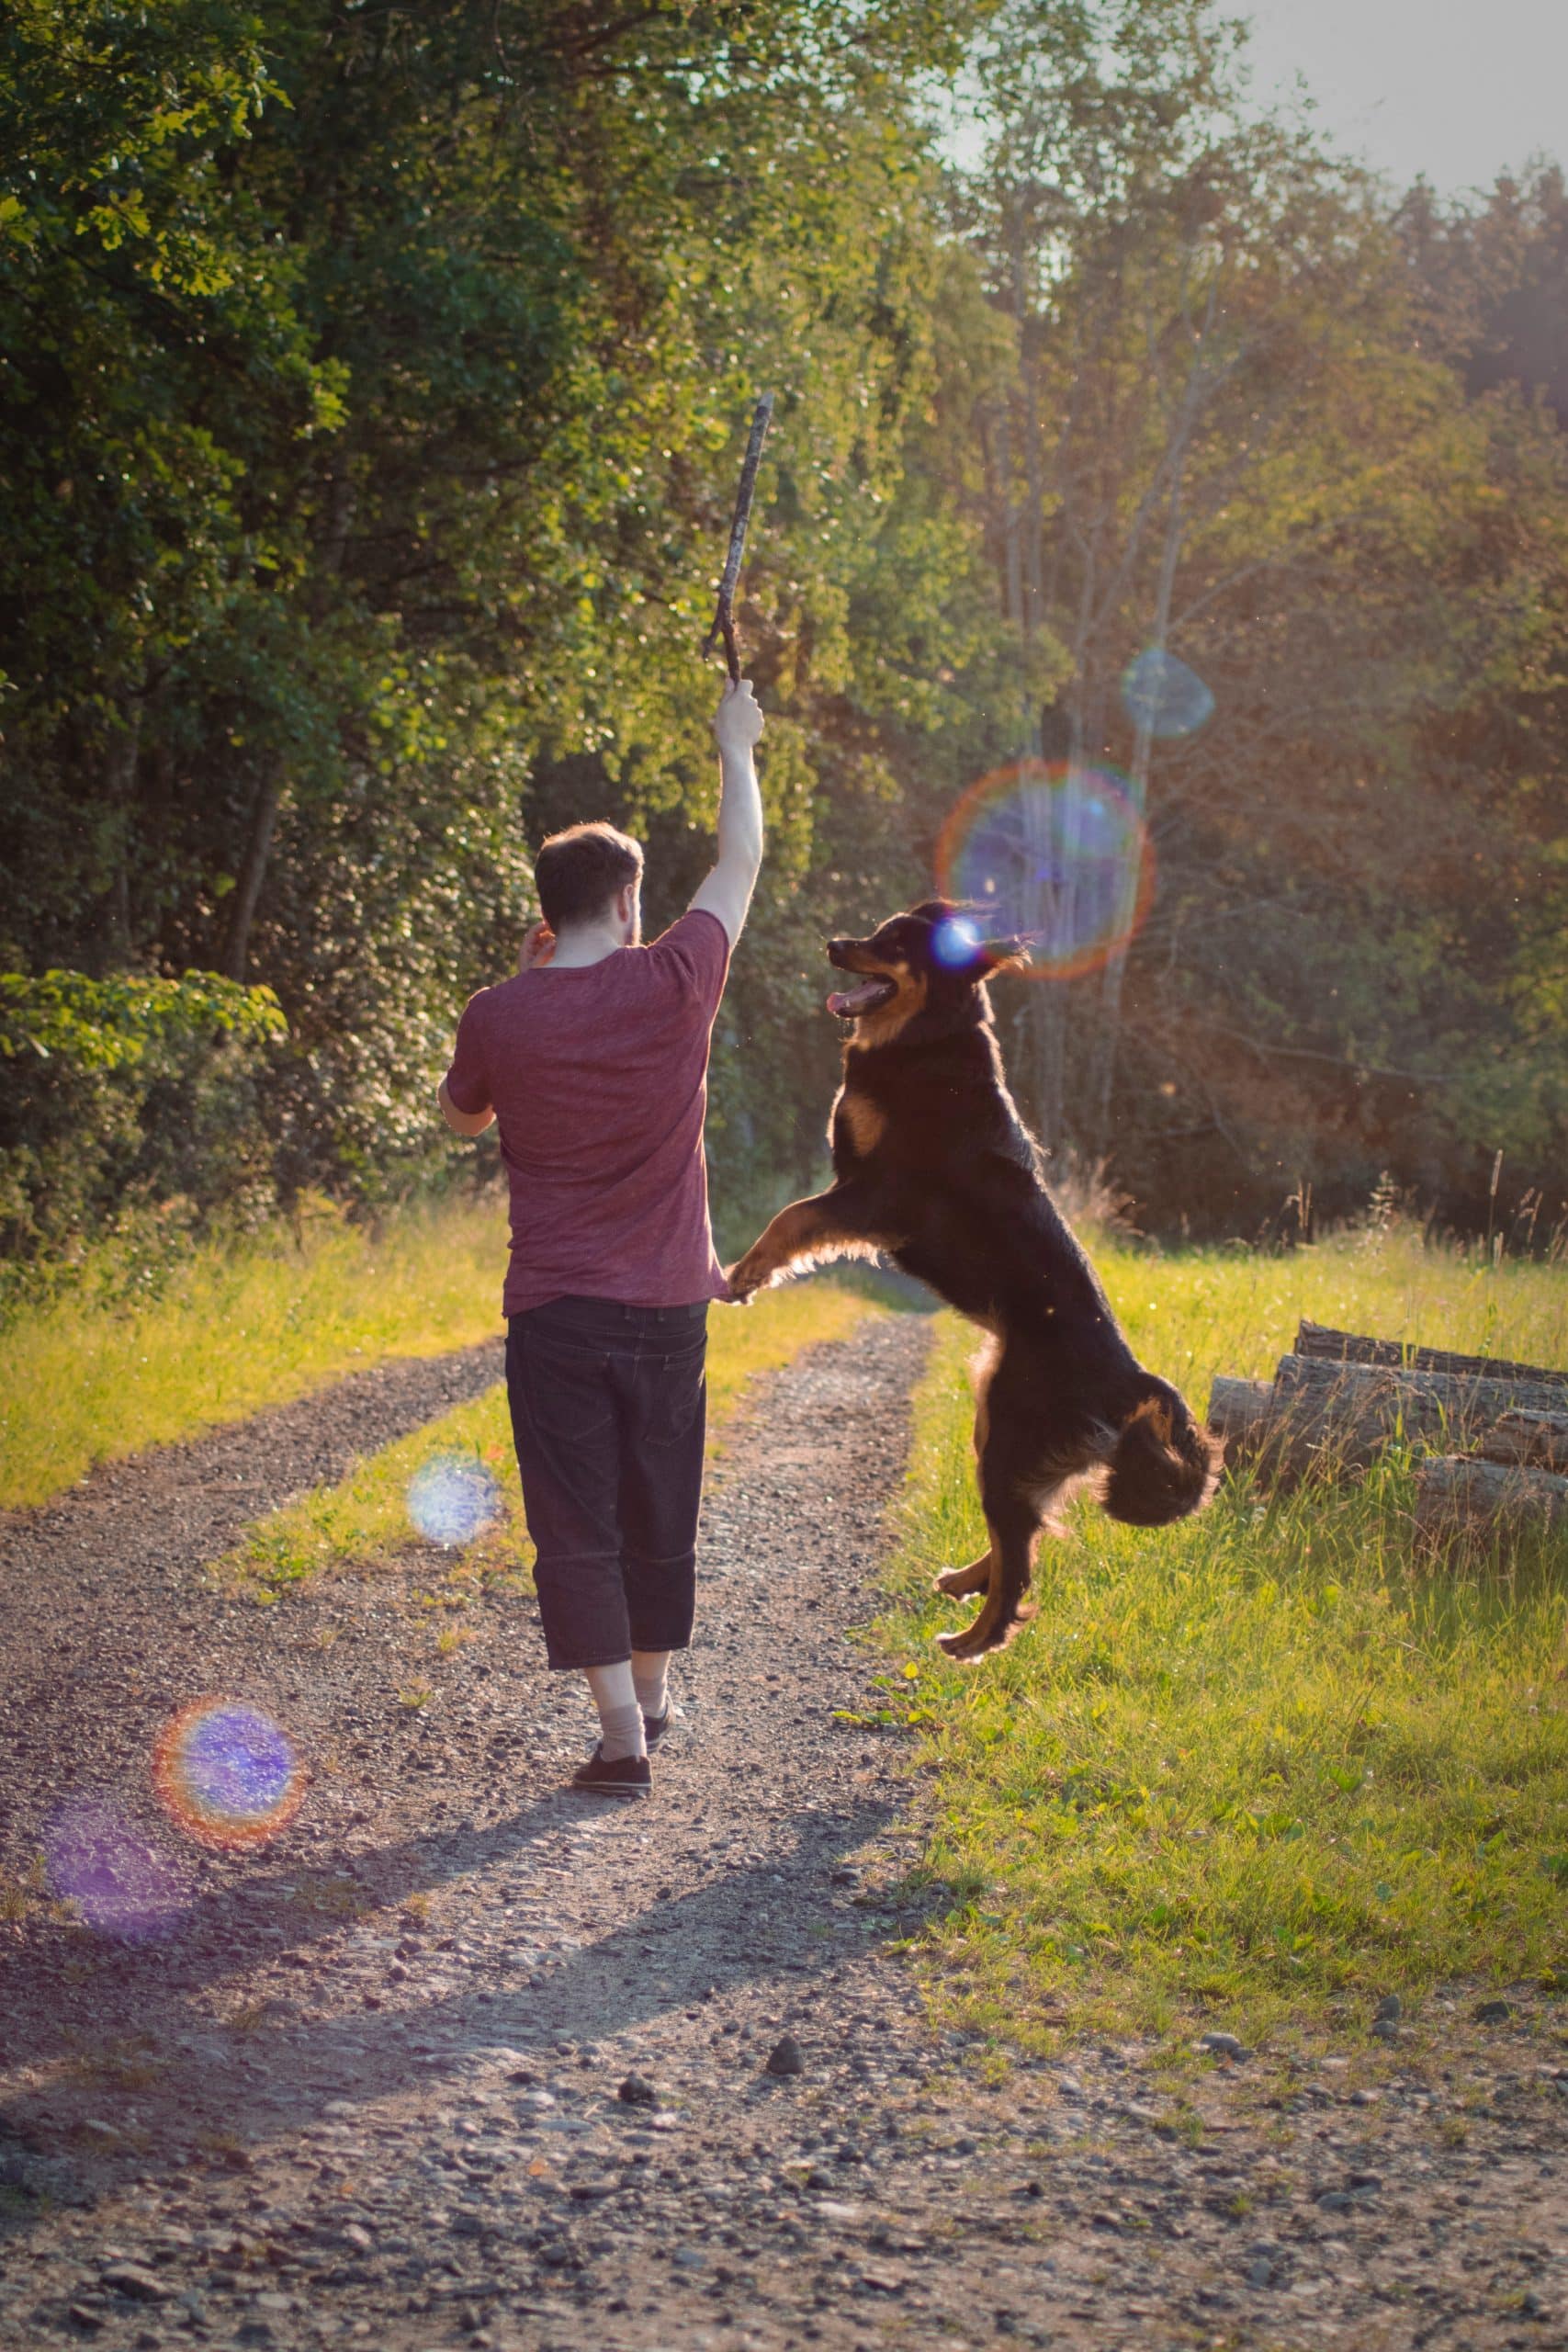 A male walking down a path with a dog jumping beside him